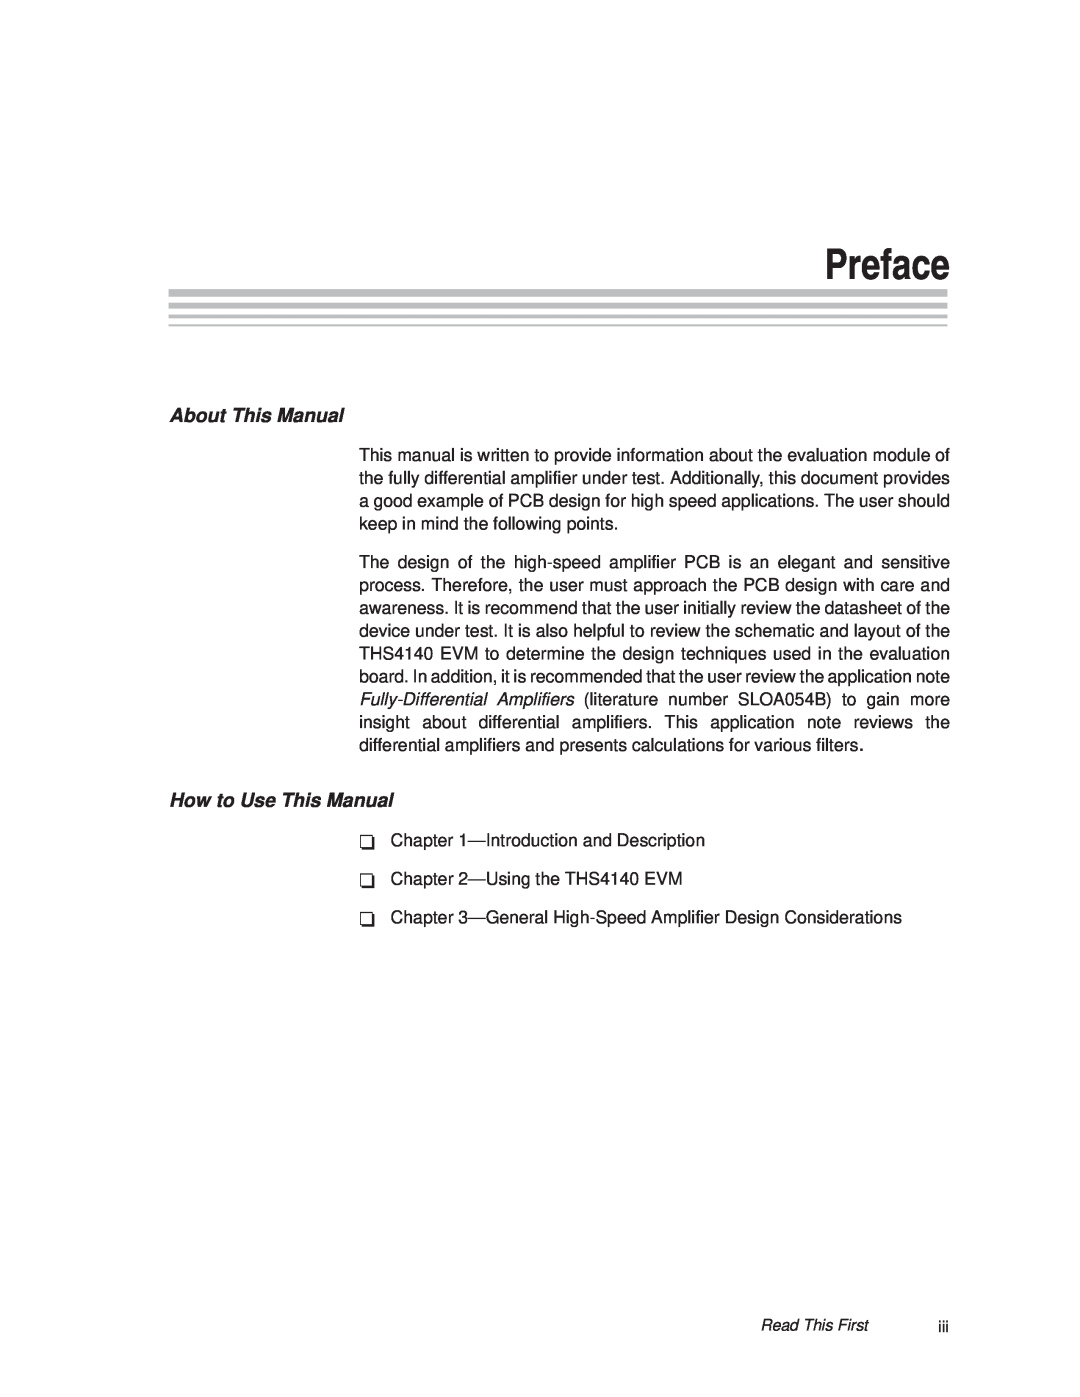 Texas Instruments SLOU106 manual Preface, About This Manual, How to Use This Manual 